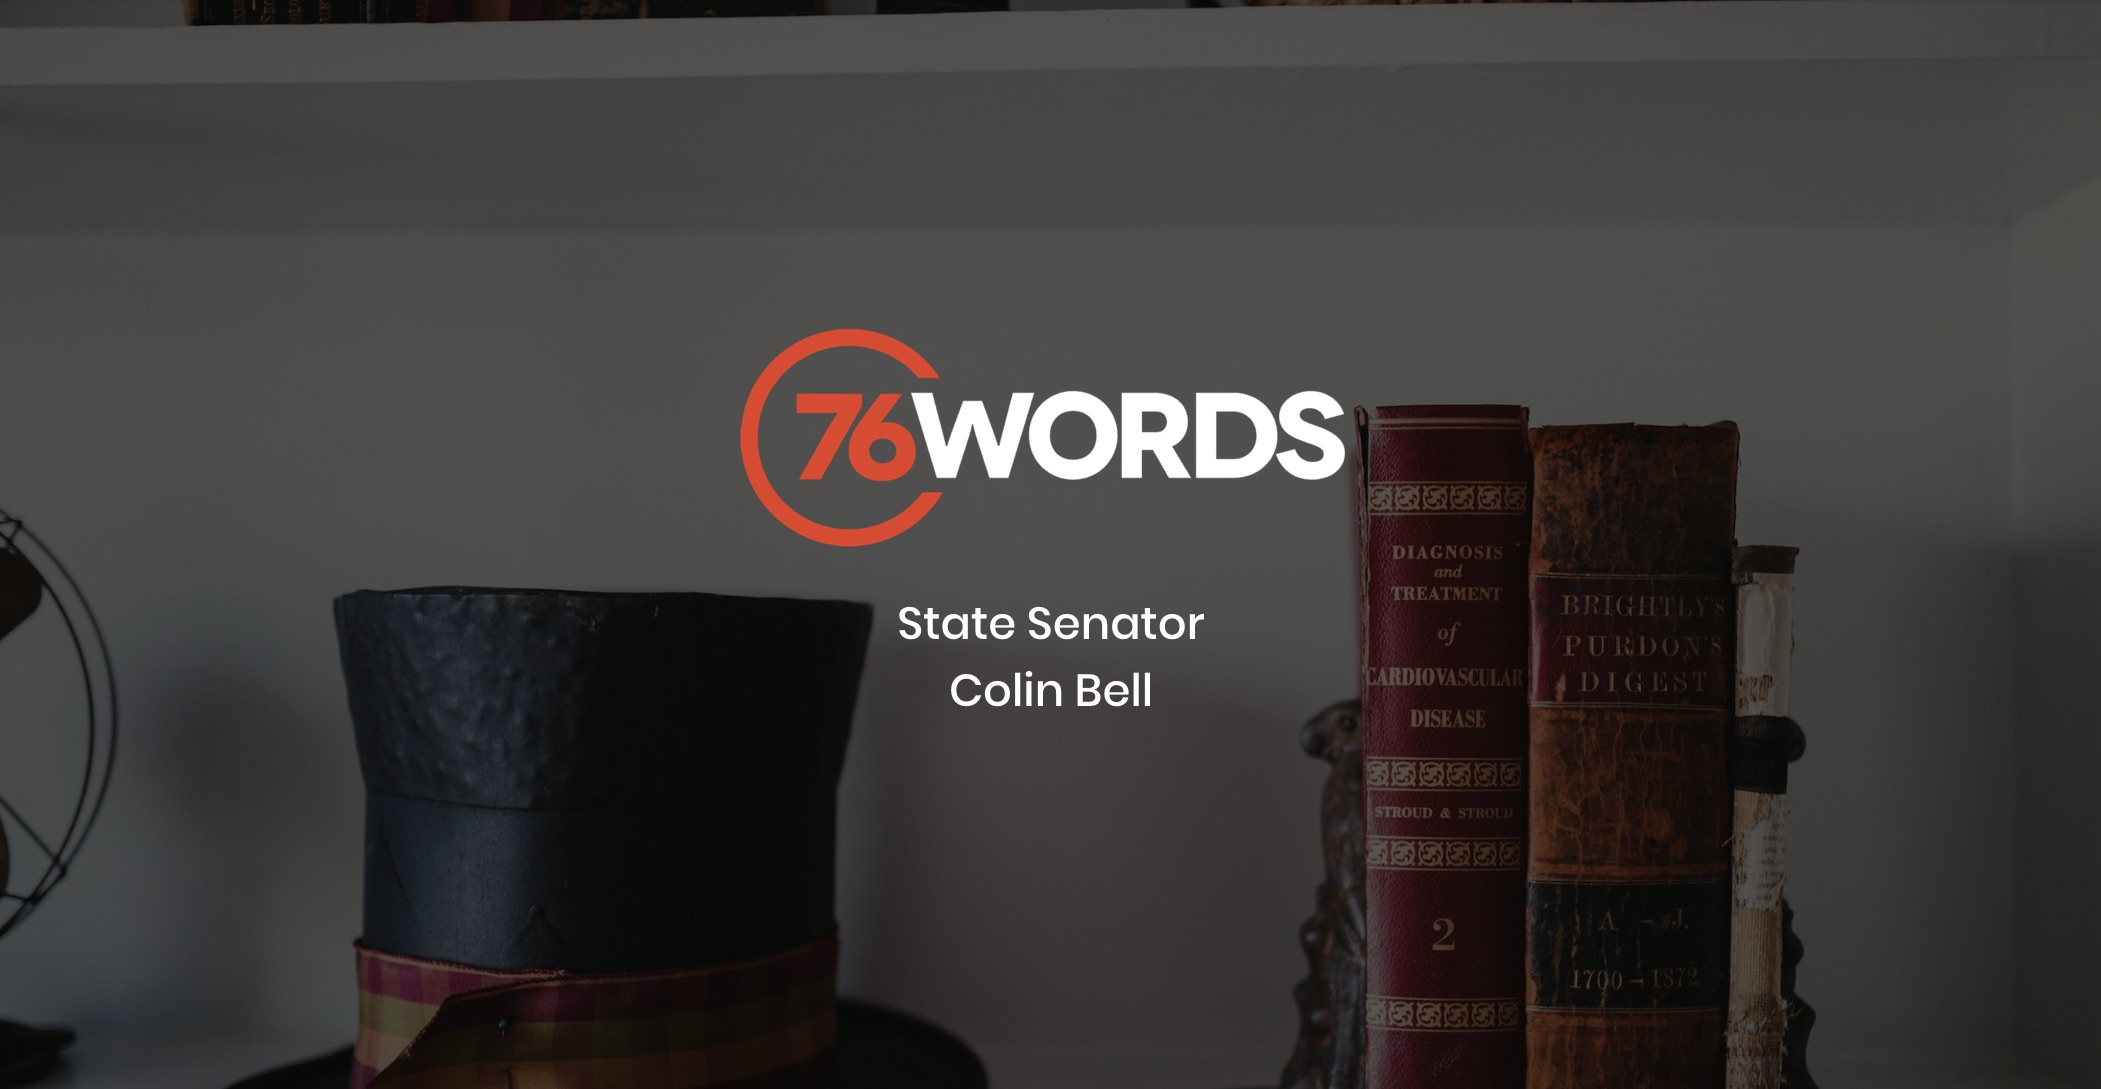 IU C&I Studios Page White and orange 76 Words State Senator Colin Bell logo with dimmed background showing closeup of two books and a top hat with ribbon on a shelf with book holders